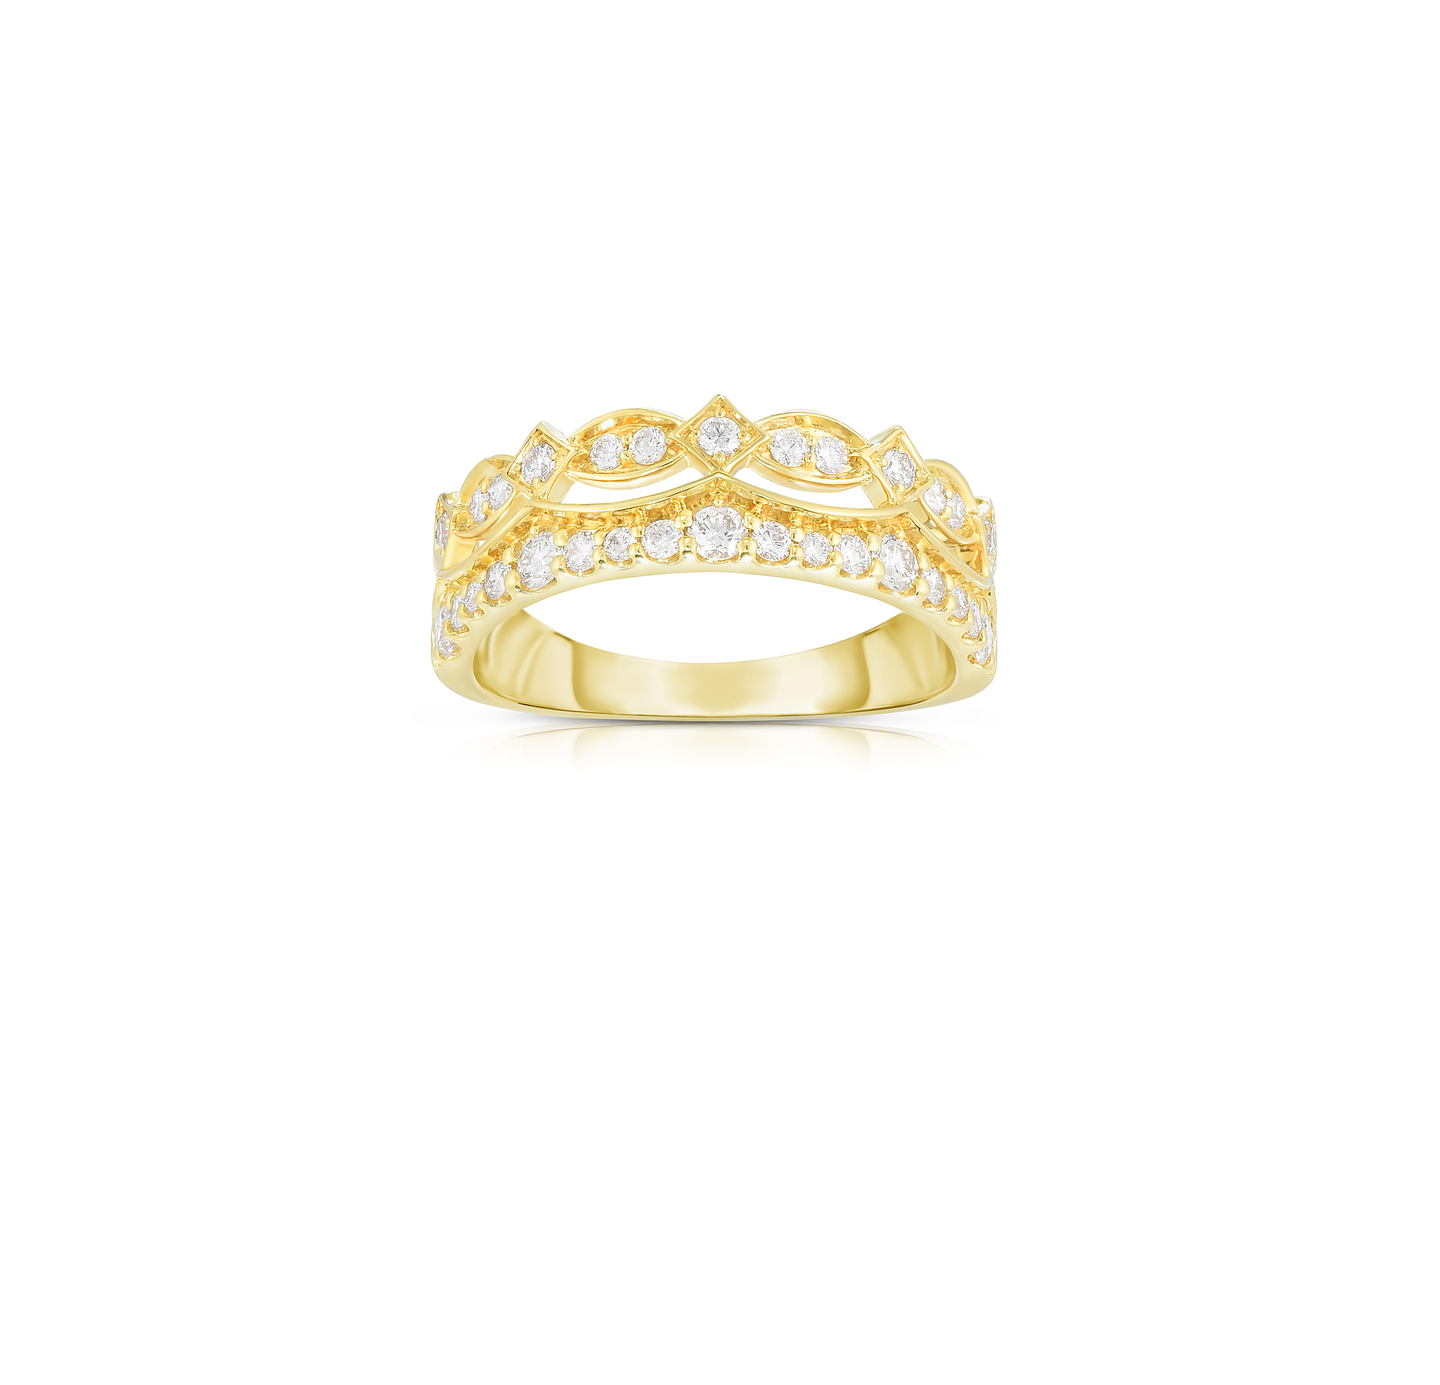 Sabel Collection 14K Yellow Gold Two Row Stack Diamond Ring